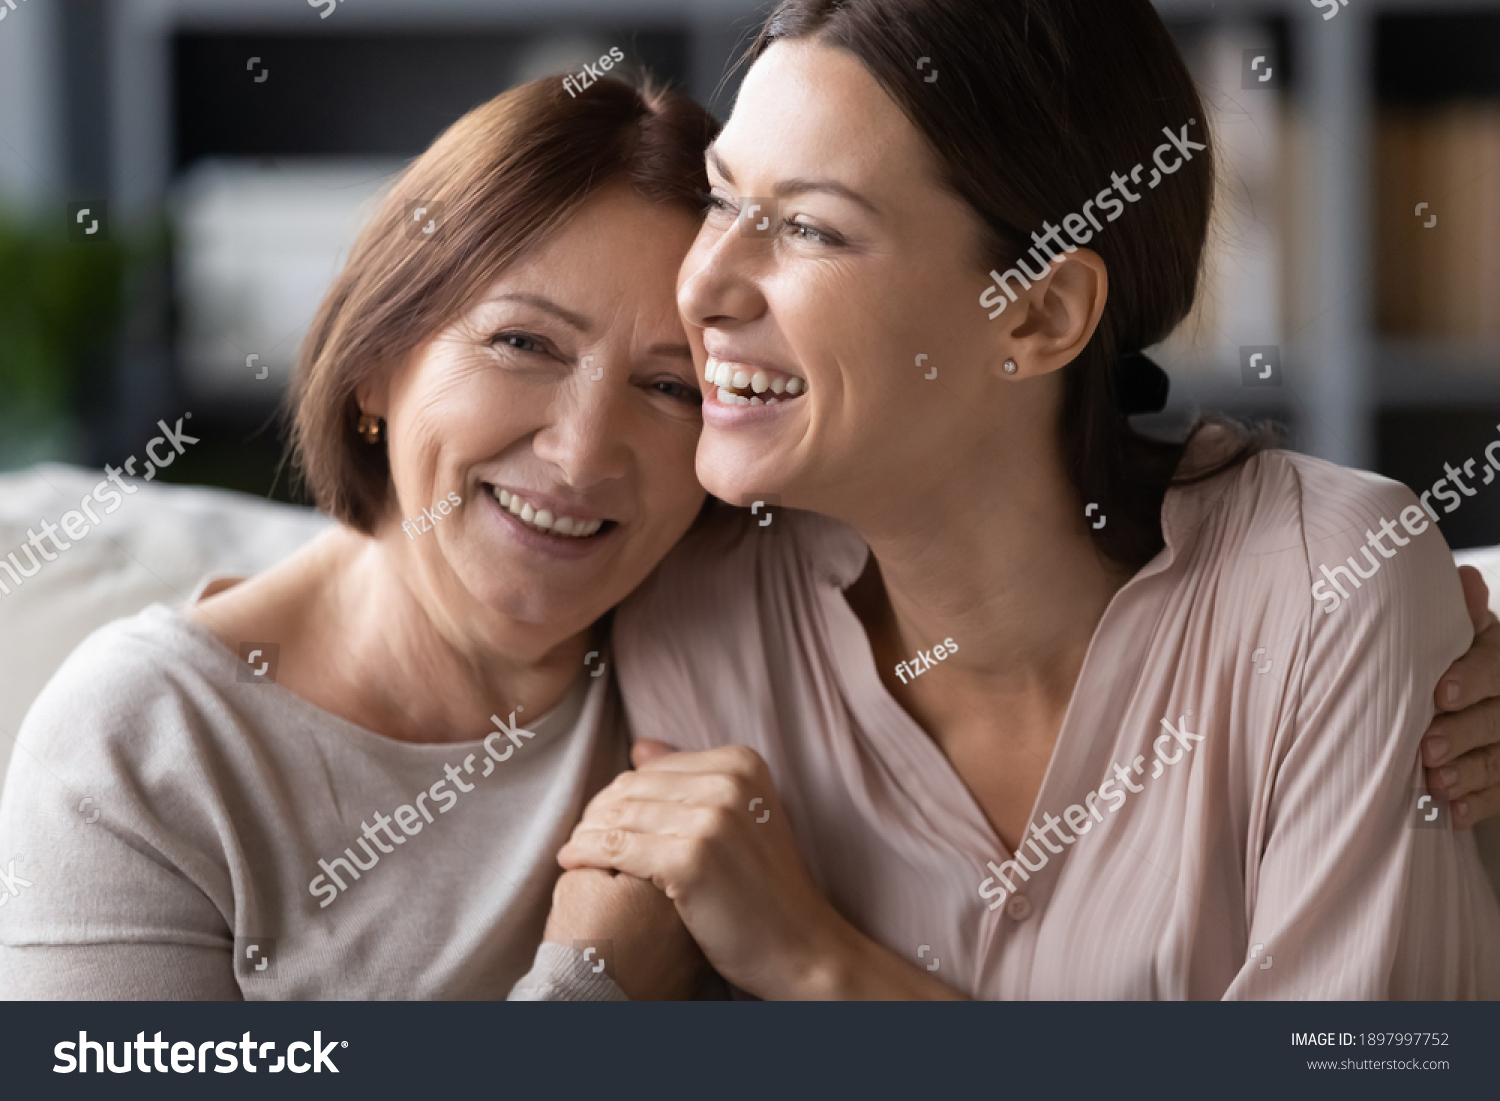 Close up head shot portrait smiling mature mother and grownup daughter cuddling, family enjoying tender moment, happy young woman with elderly mum hugging, spending leisure time together #1897997752